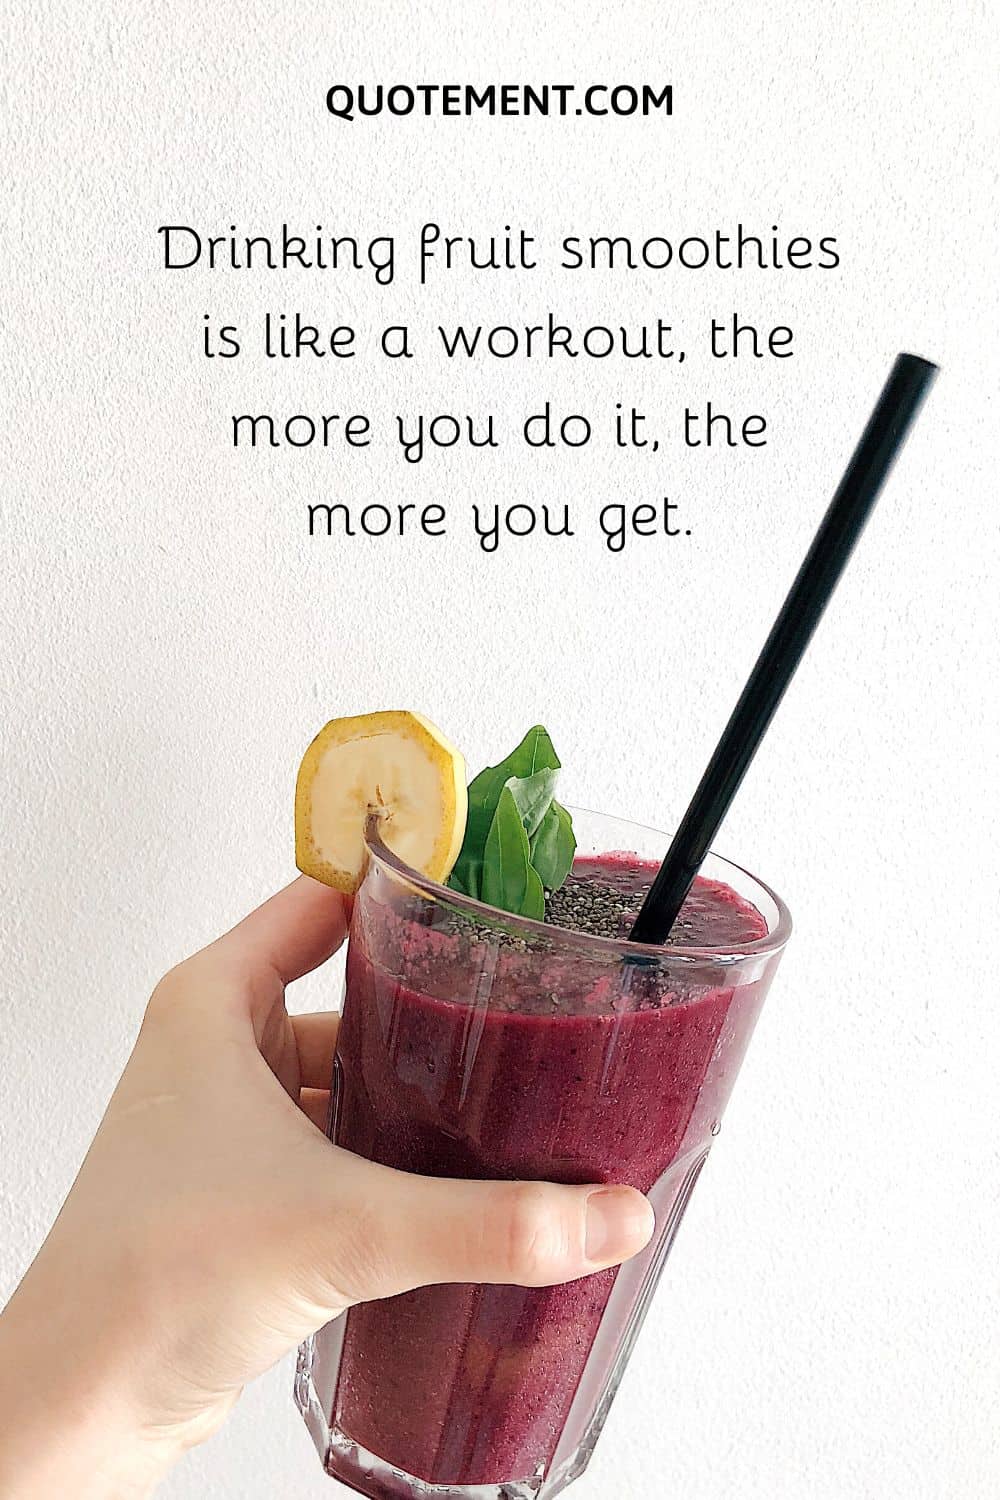 Drinking fruit smoothies is like a workout, the more you do it, the more you get.